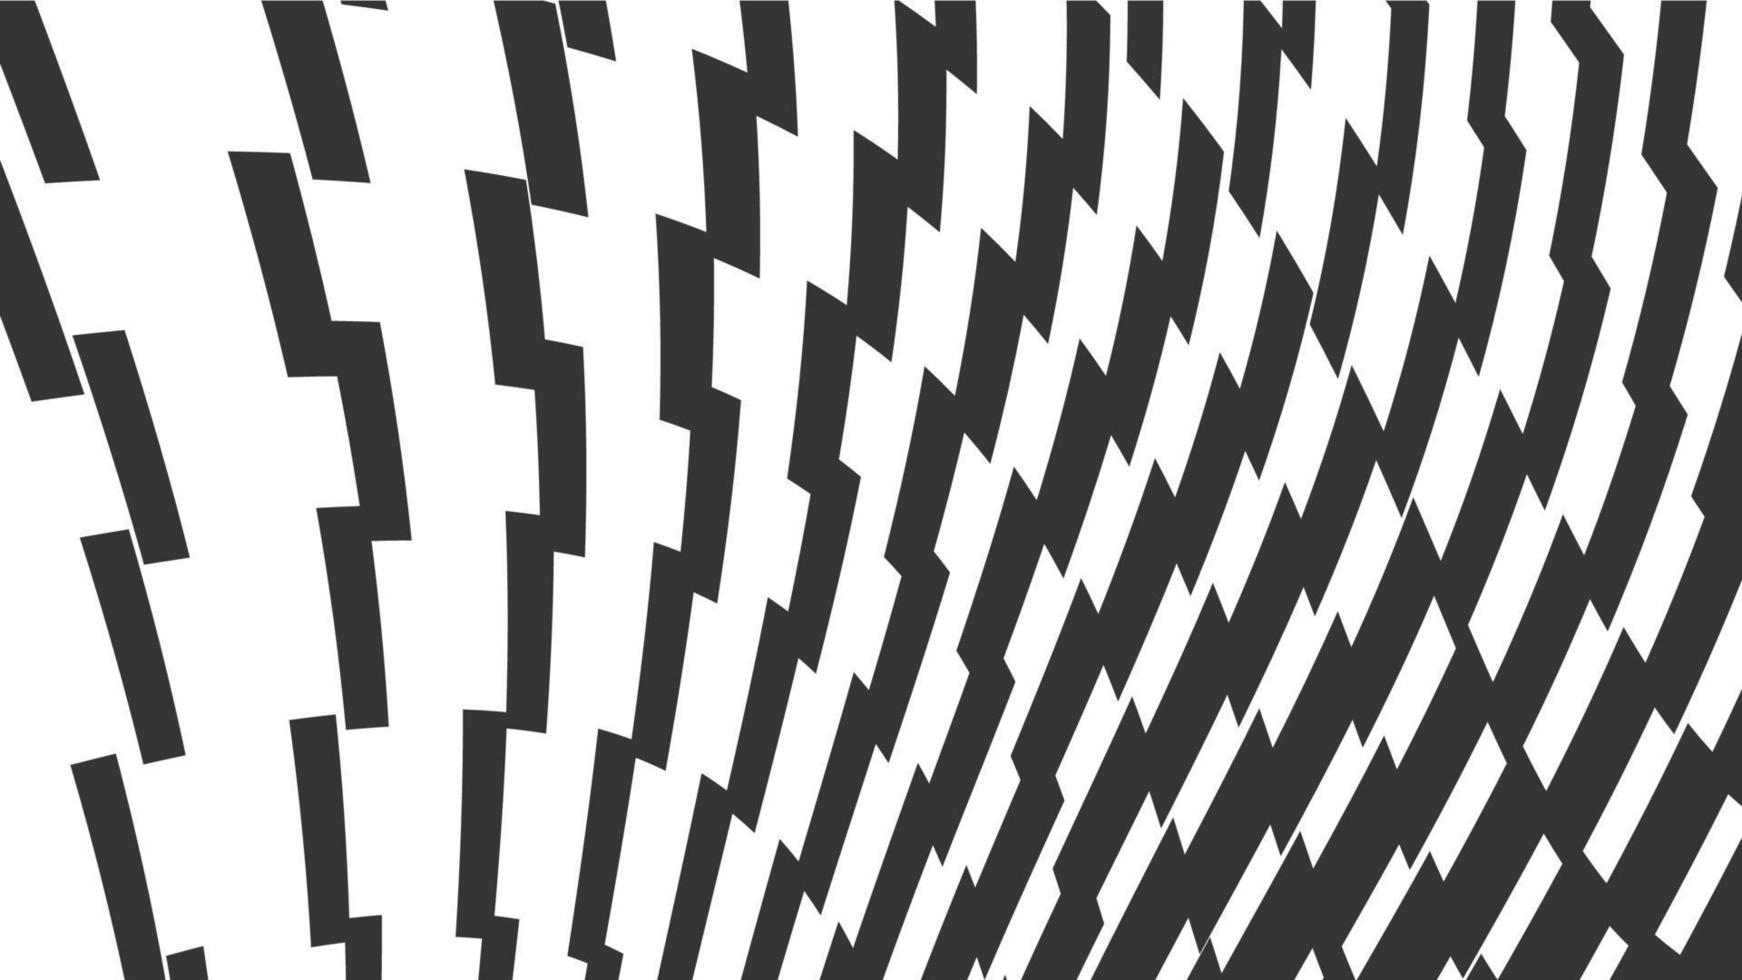 Vector abstract geometric seamless pattern with wave fading lines, tracks, halftone stripes. Extreme sport style illustration, urban art. Trendy monochrome graphic texture. Stylish sports pattern.